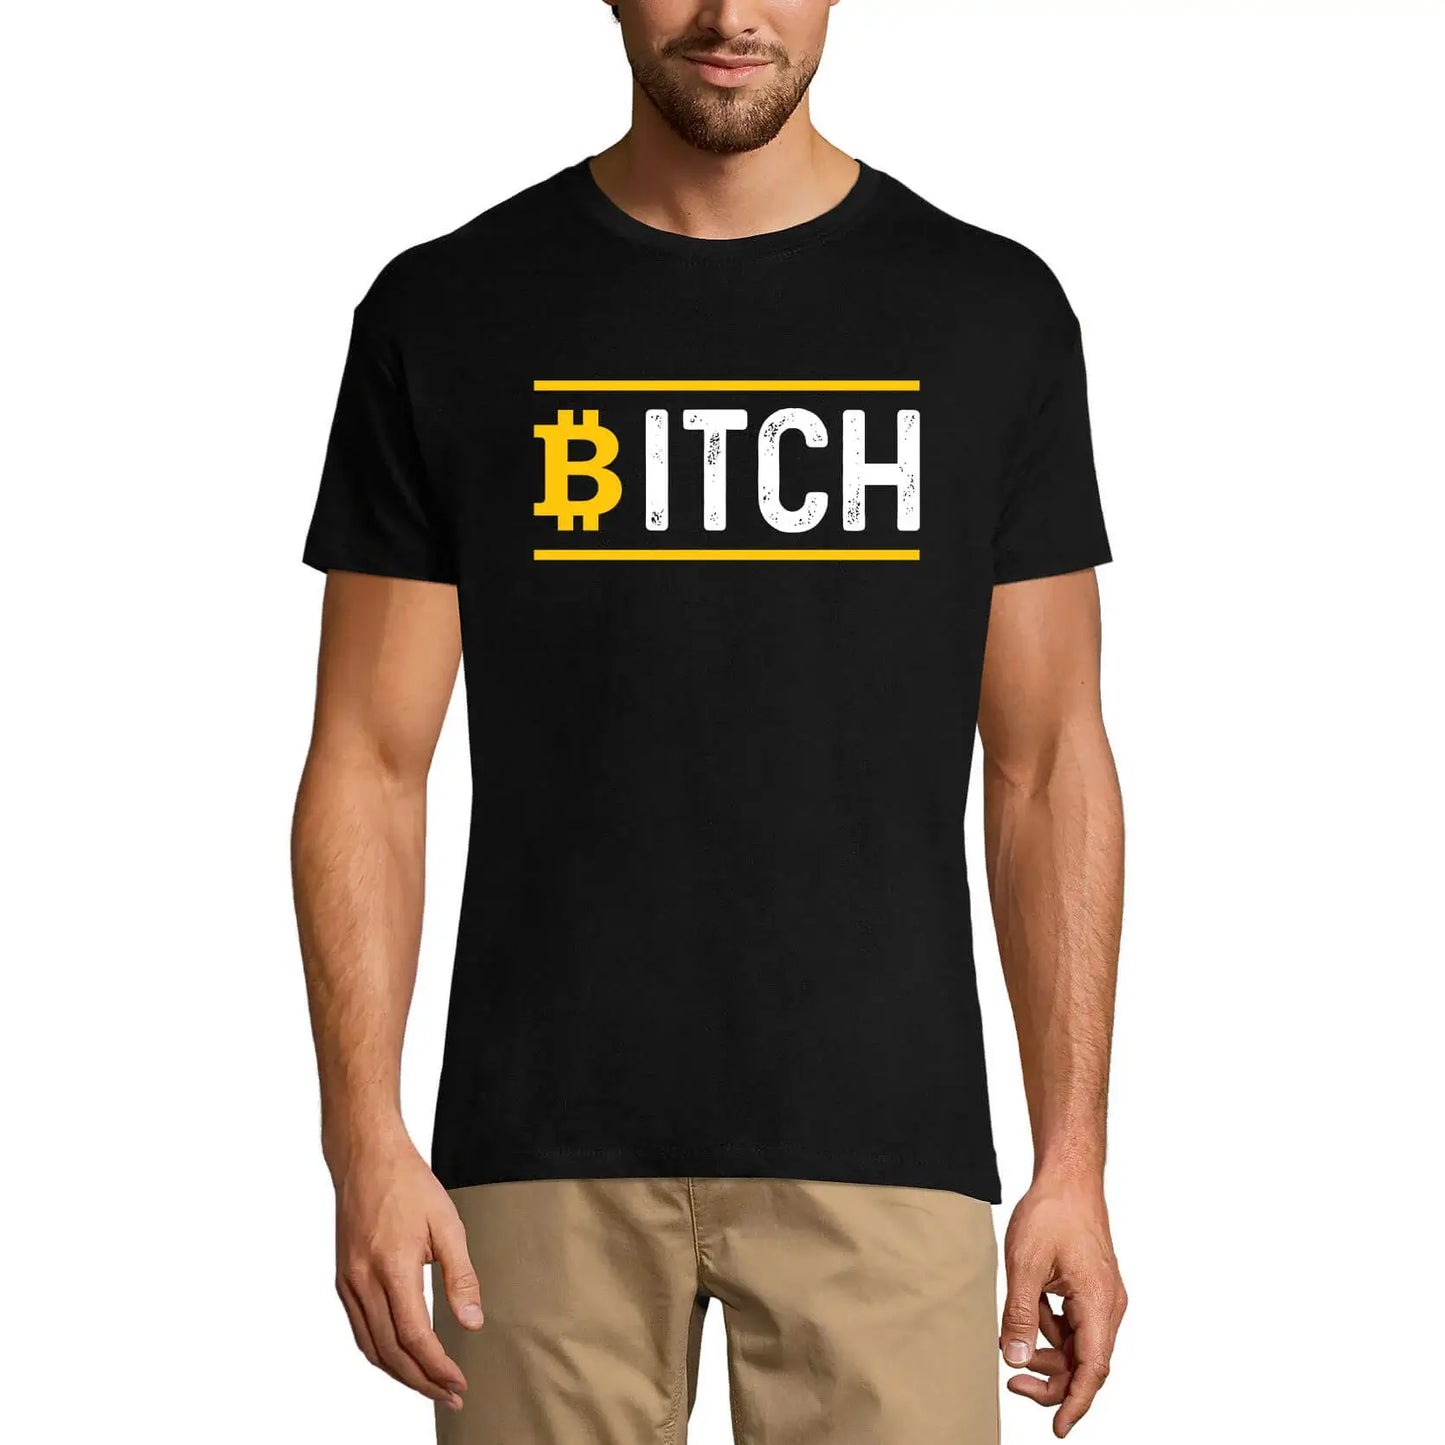 Men's Graphic T-Shirt Bitcoin Blockchain Currency - Graphic Hodl Eco-Friendly Limited Edition Short Sleeve Tee-Shirt Vintage Birthday Gift Novelty